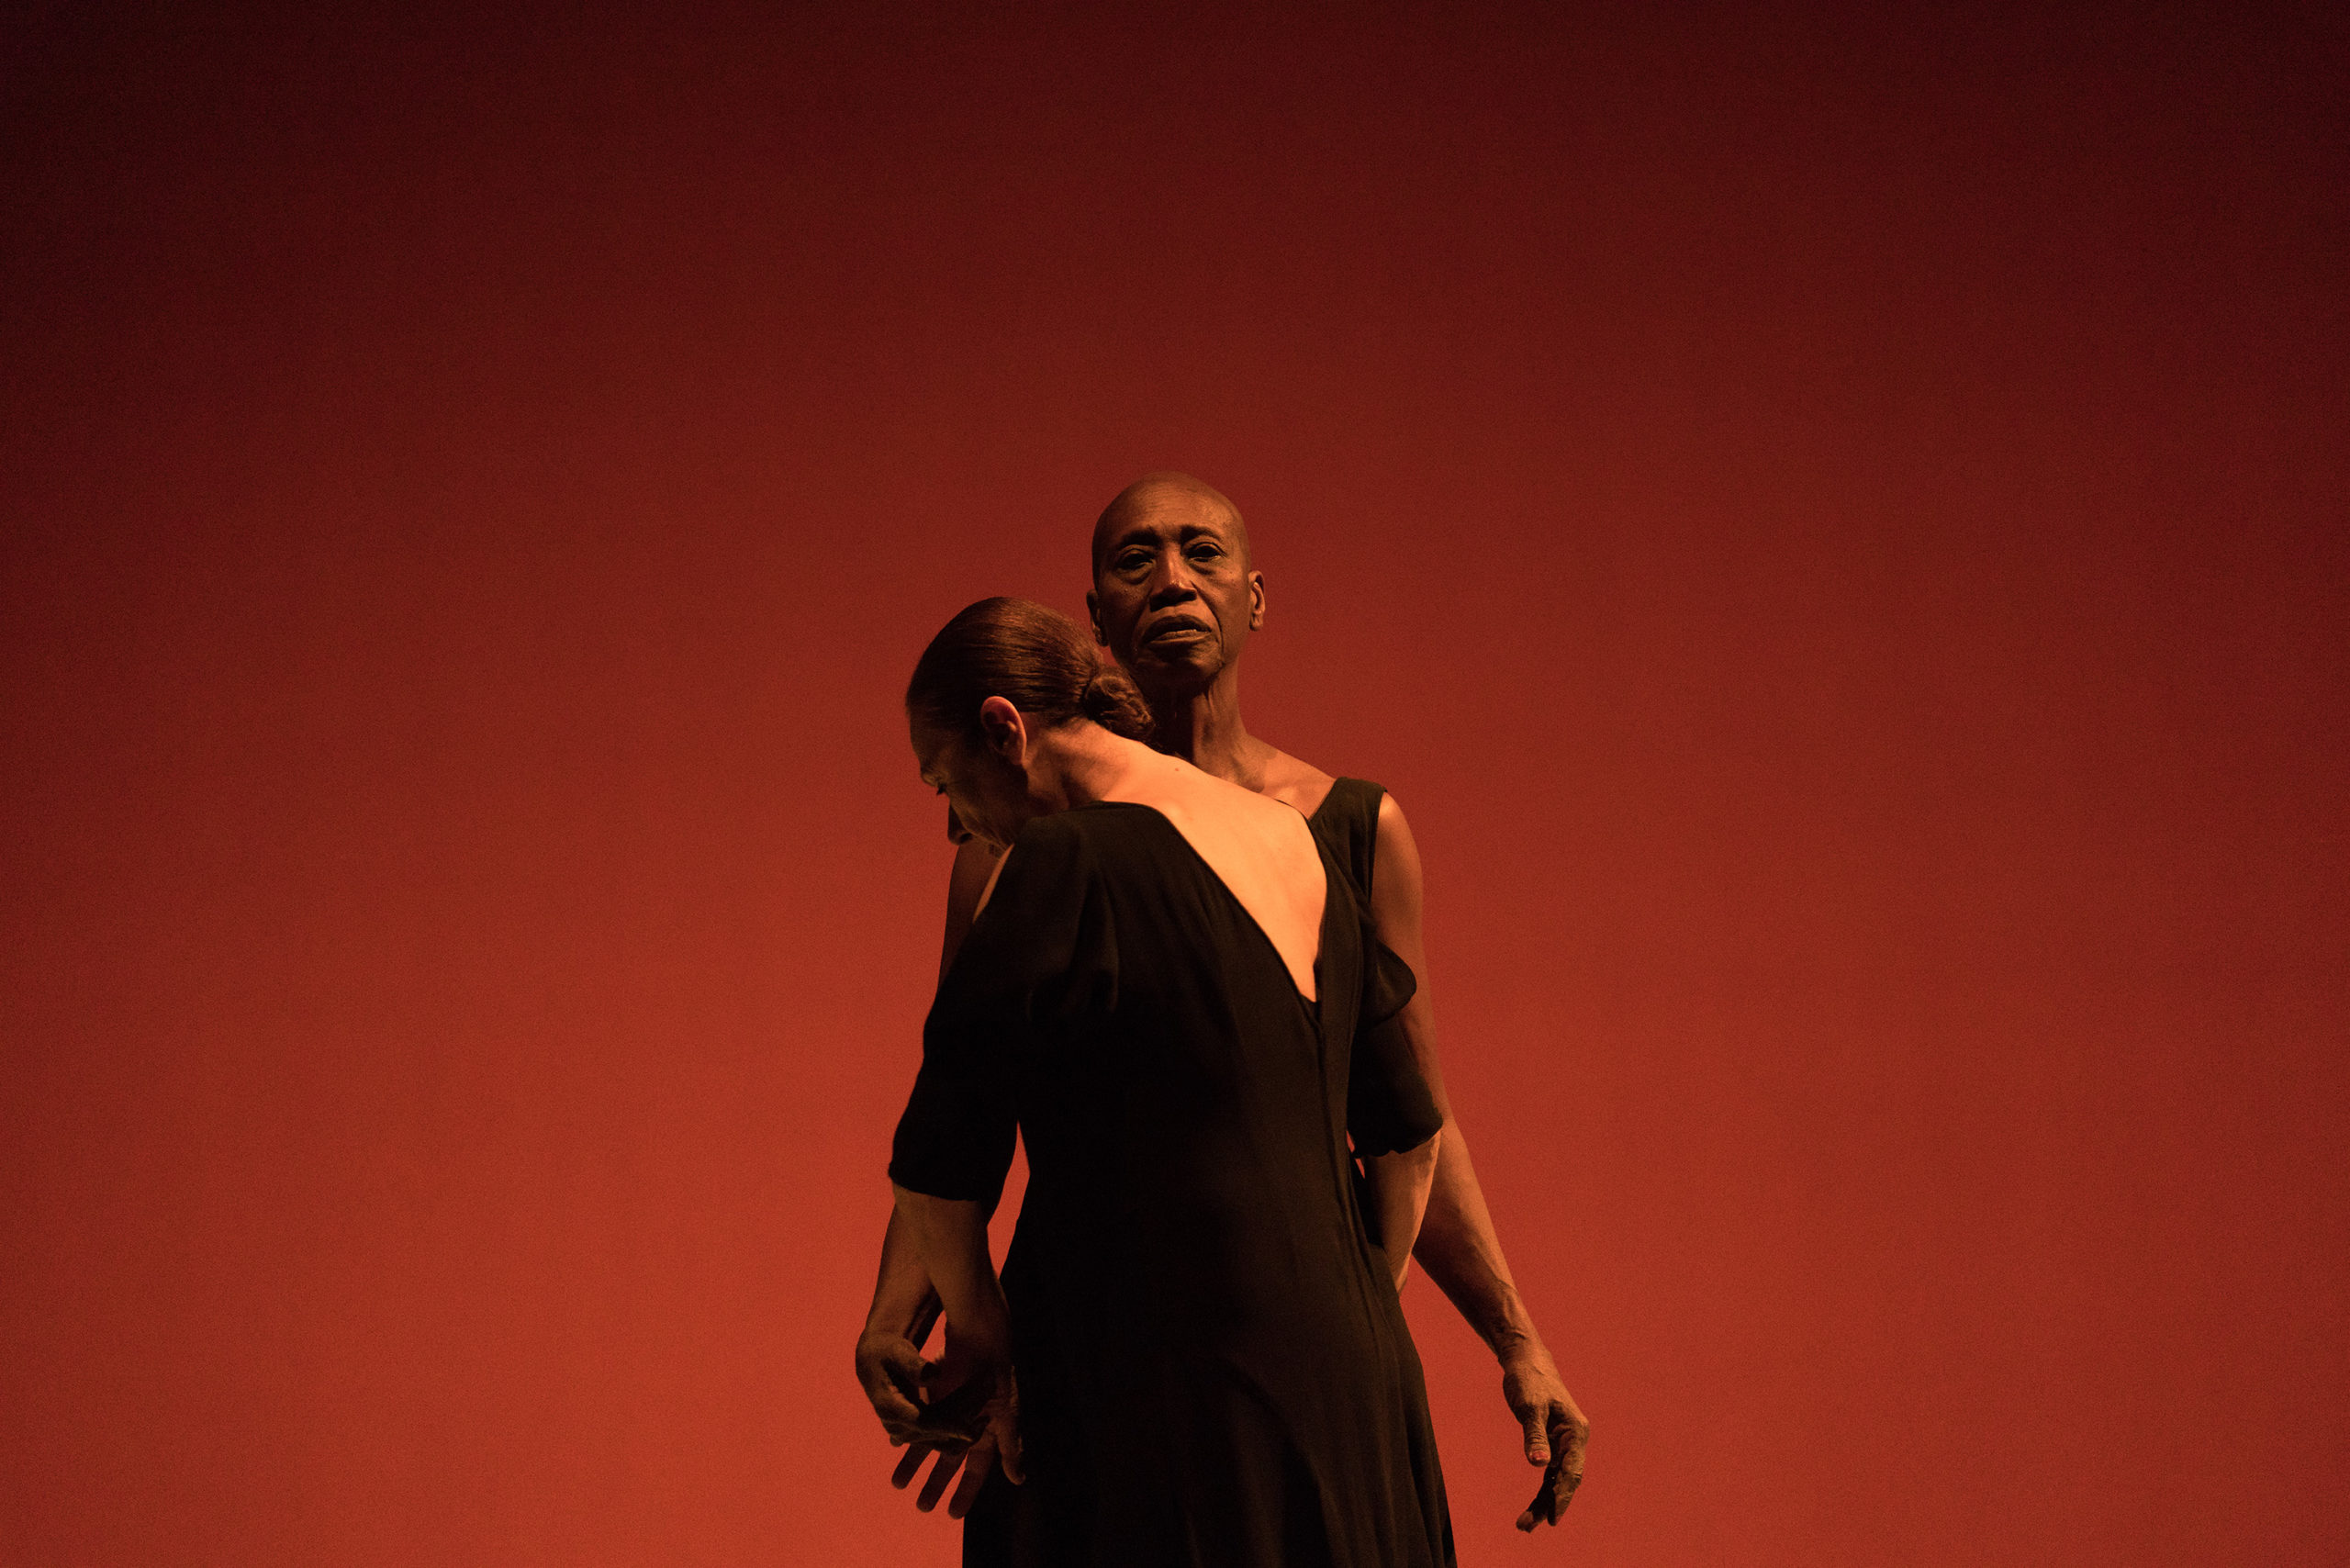 Germaine Acogny stands upright, facing downstage with her arms lightly raised from her sides. Malou Airaudo faces Acogny, chin lowered to one of her shoulders, arms wrapping around Acogny's back. The stage behind them is lit a deep red.